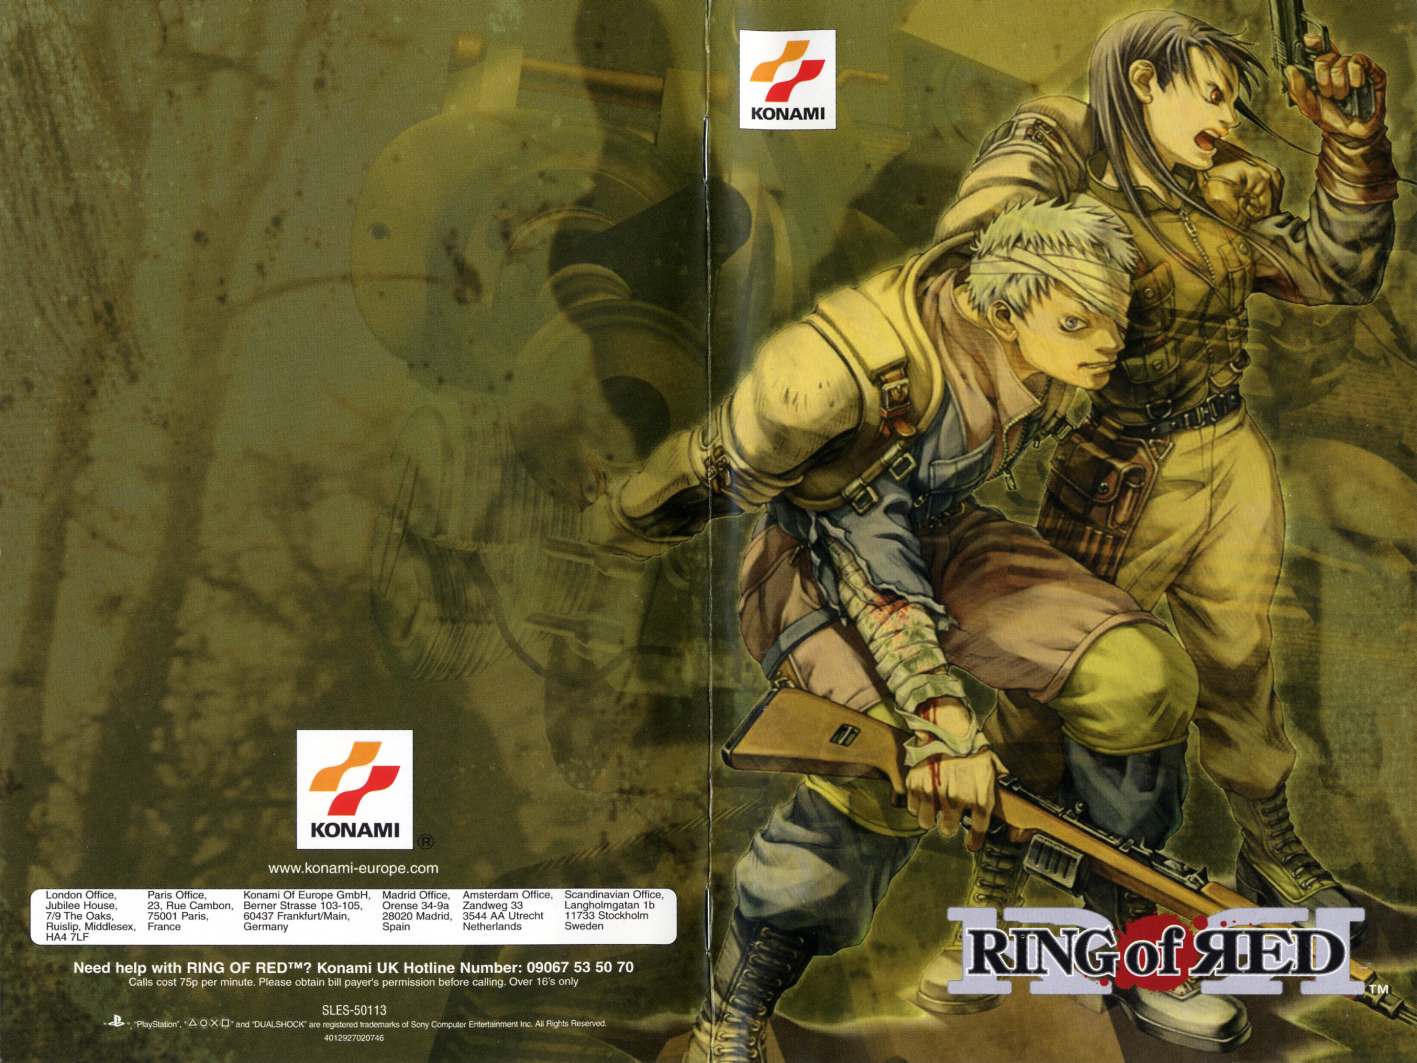 Ring Of Red Db Playstation 2 Covers Cover Century Over 500 000 Album Art Covers For Free